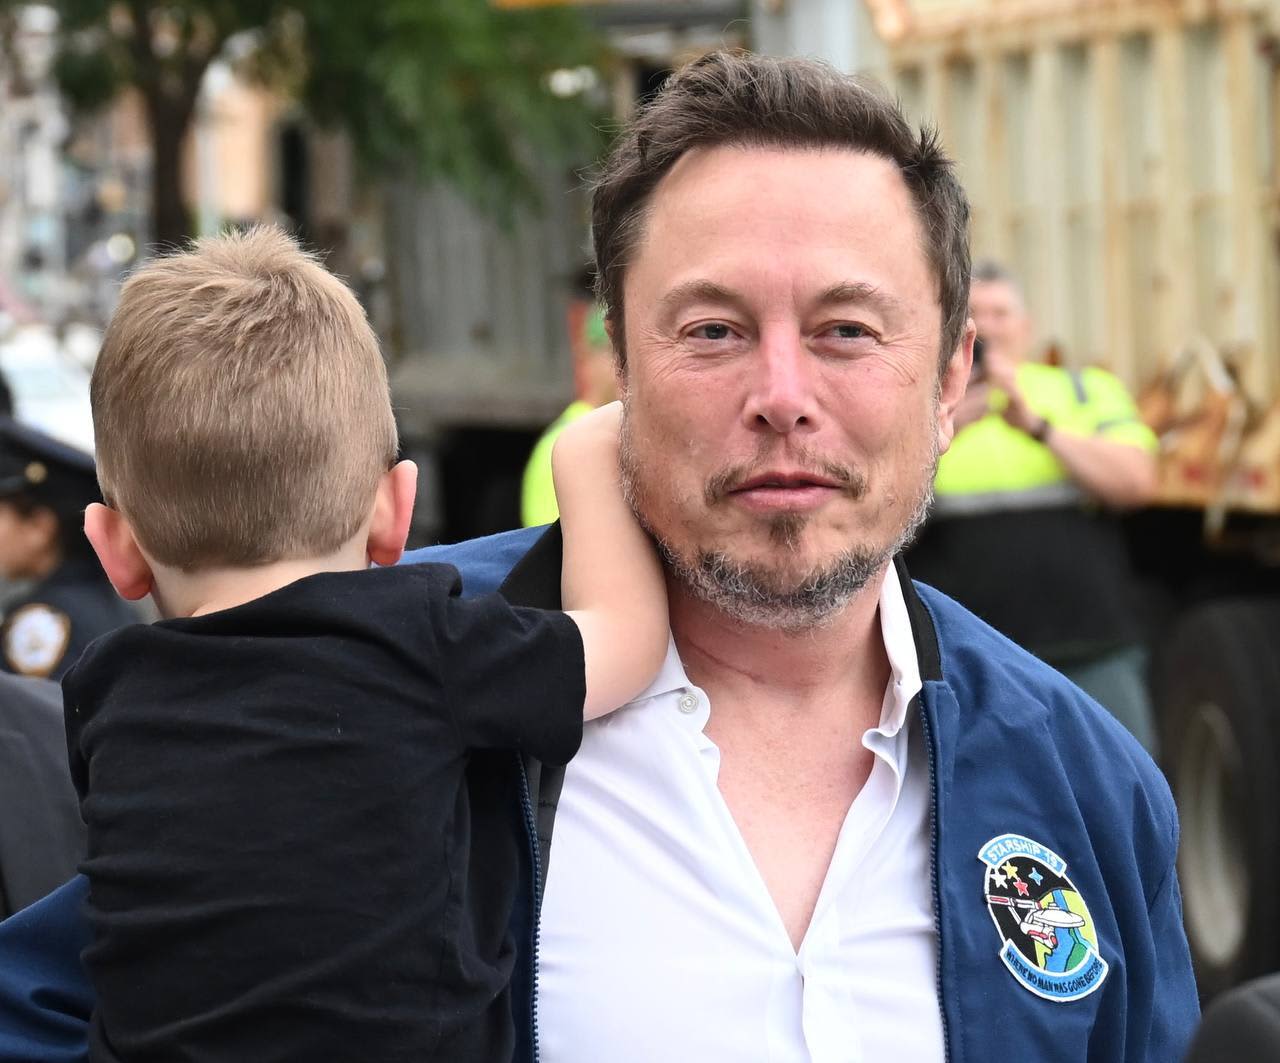 Elon Musk’s X illegally fired employee who publicly challenged return-to-work plans, NLRB alleges